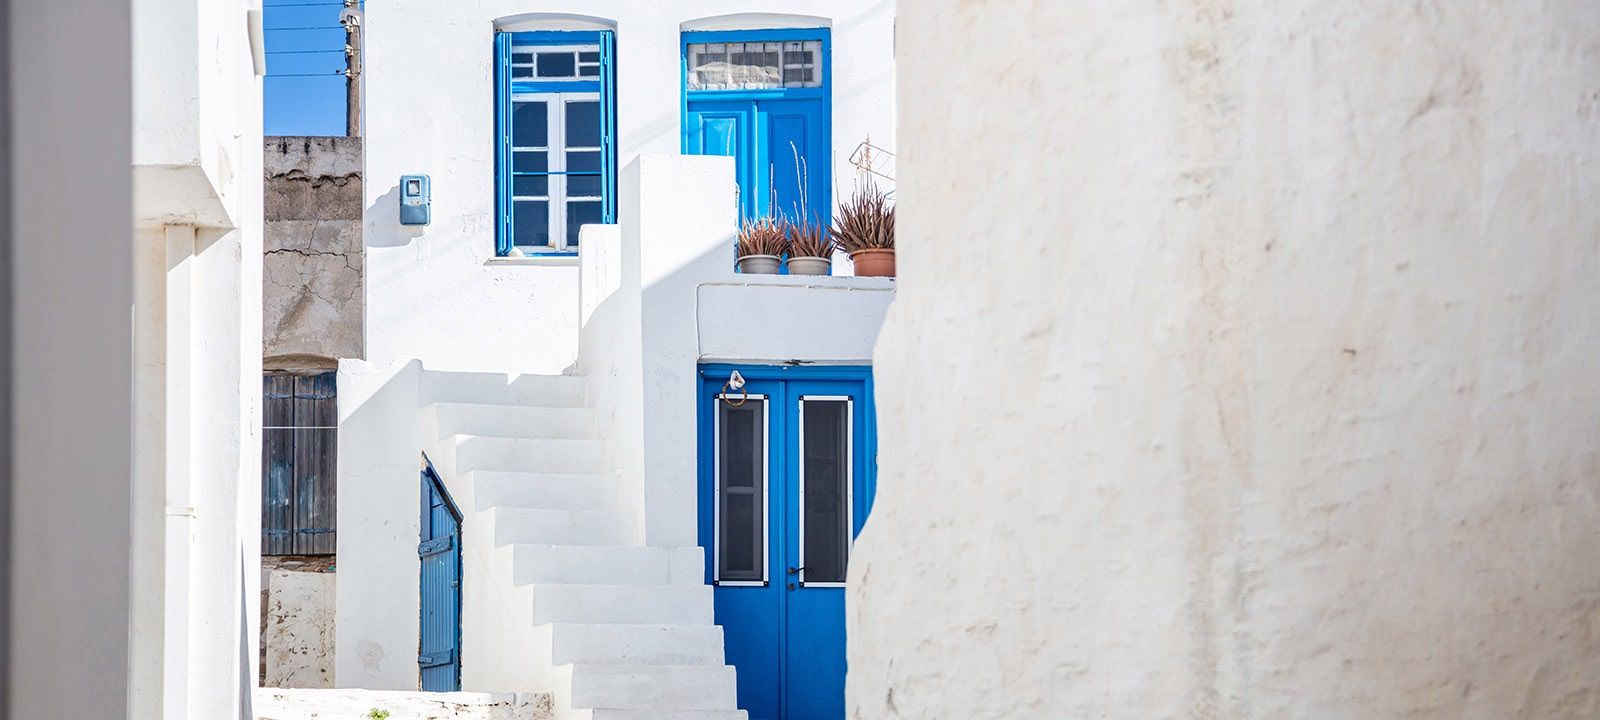 The destination of Kythnos for a trip with Greek Adventures